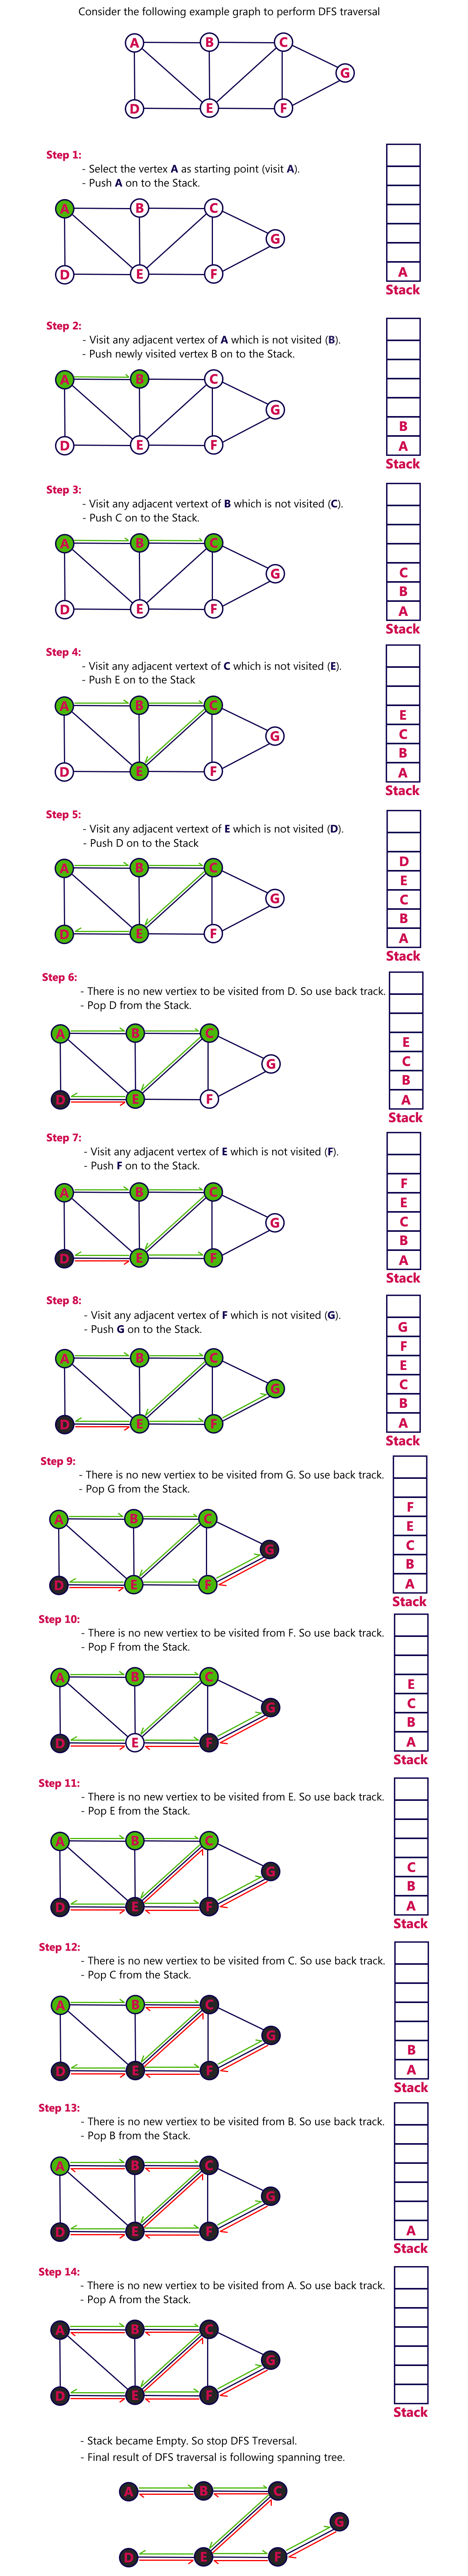 Depth-first search (DFS) spanning tree of an undirected graph, (a